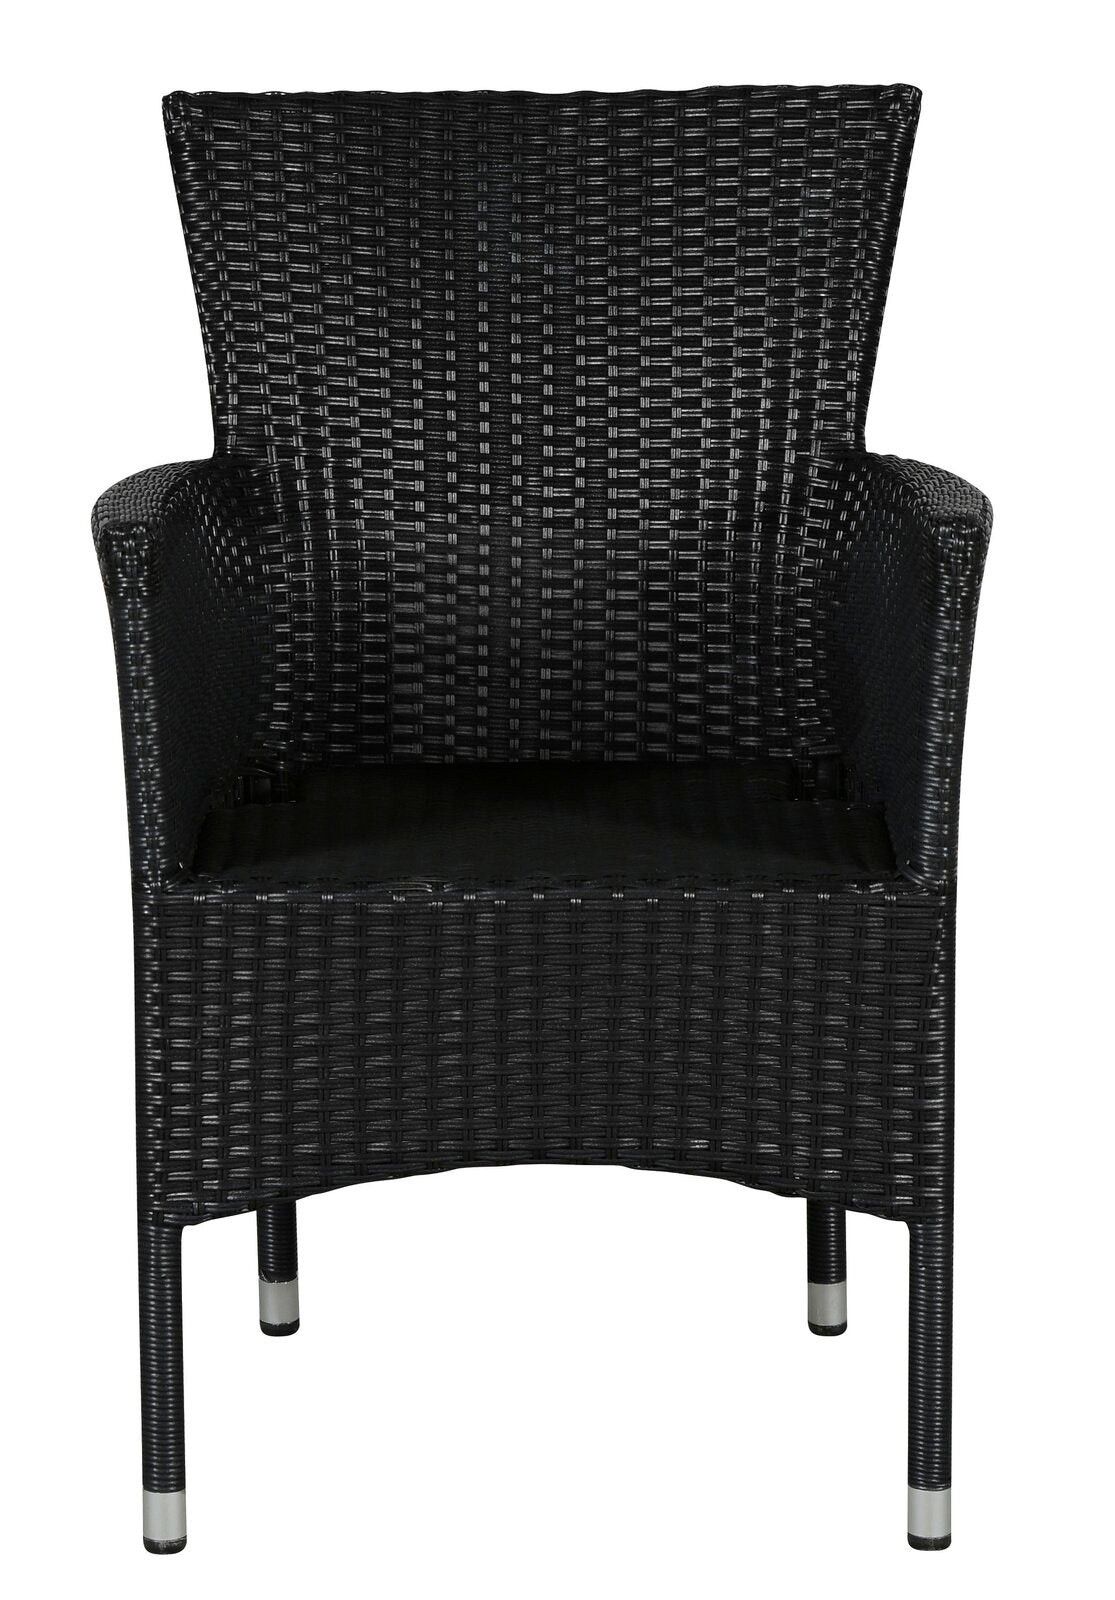 Calor Outdoor Wicker Poly Rattan Stackable Outdoor Dining Chair Stacking - Black (Set of 4) - Direct Factory Furniture Australia